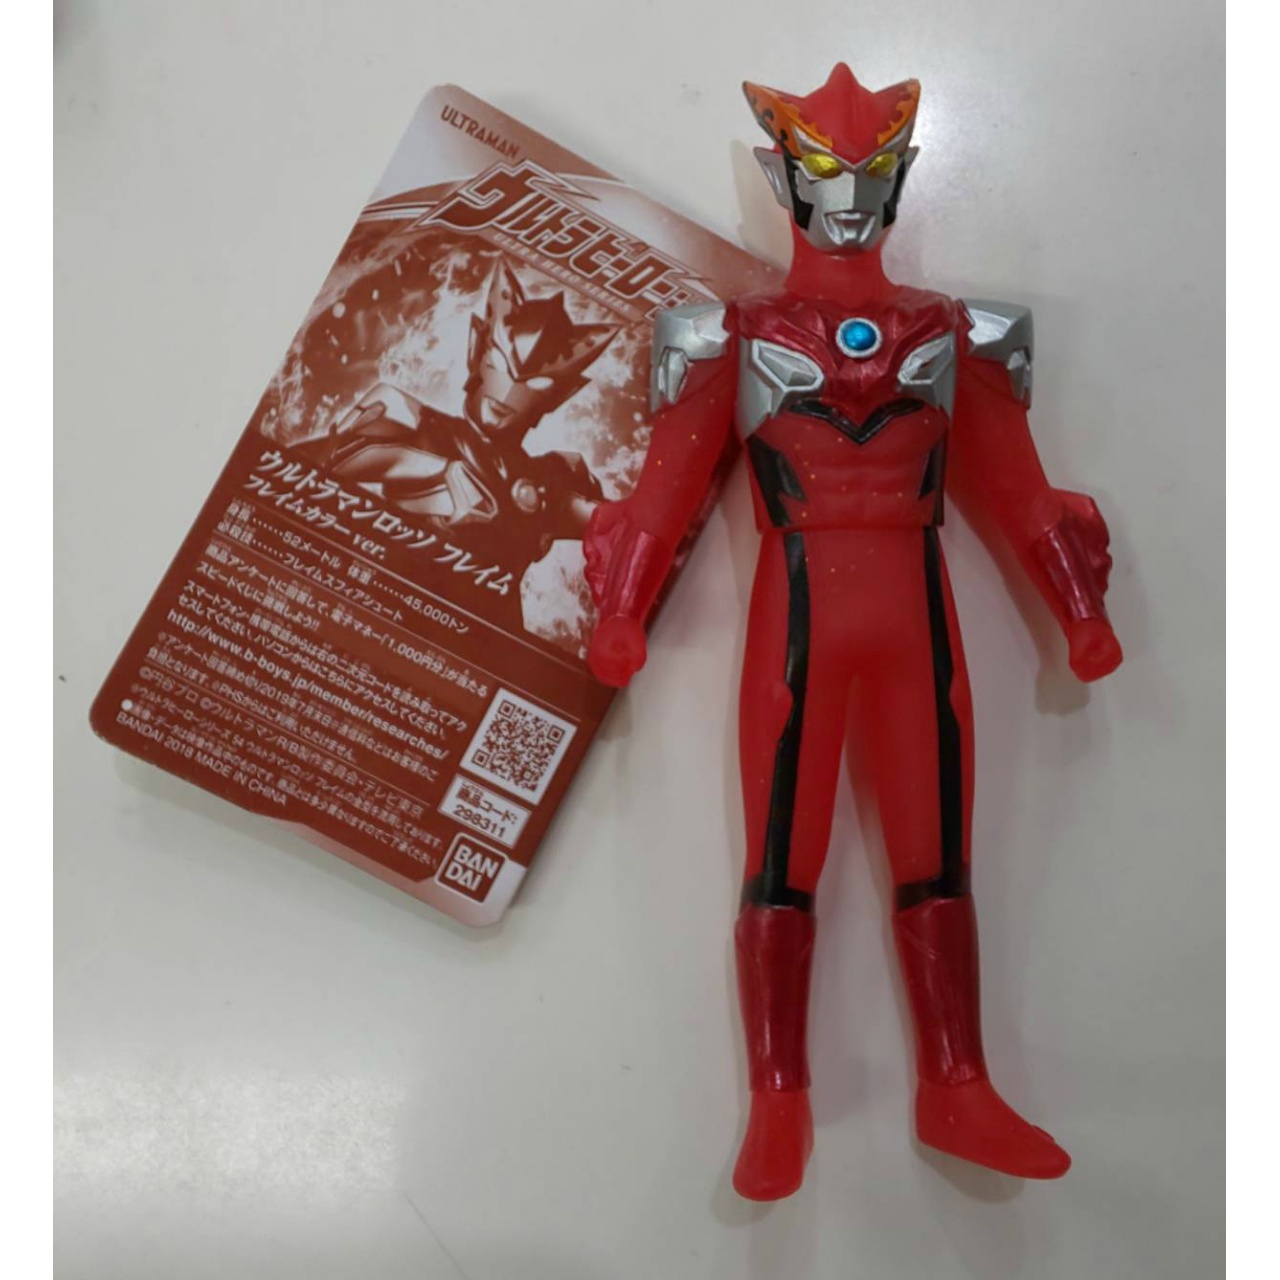 Bandai Ultra Hero Series Special Limited Ultraman Rosso Flame (Flame Color ver.)